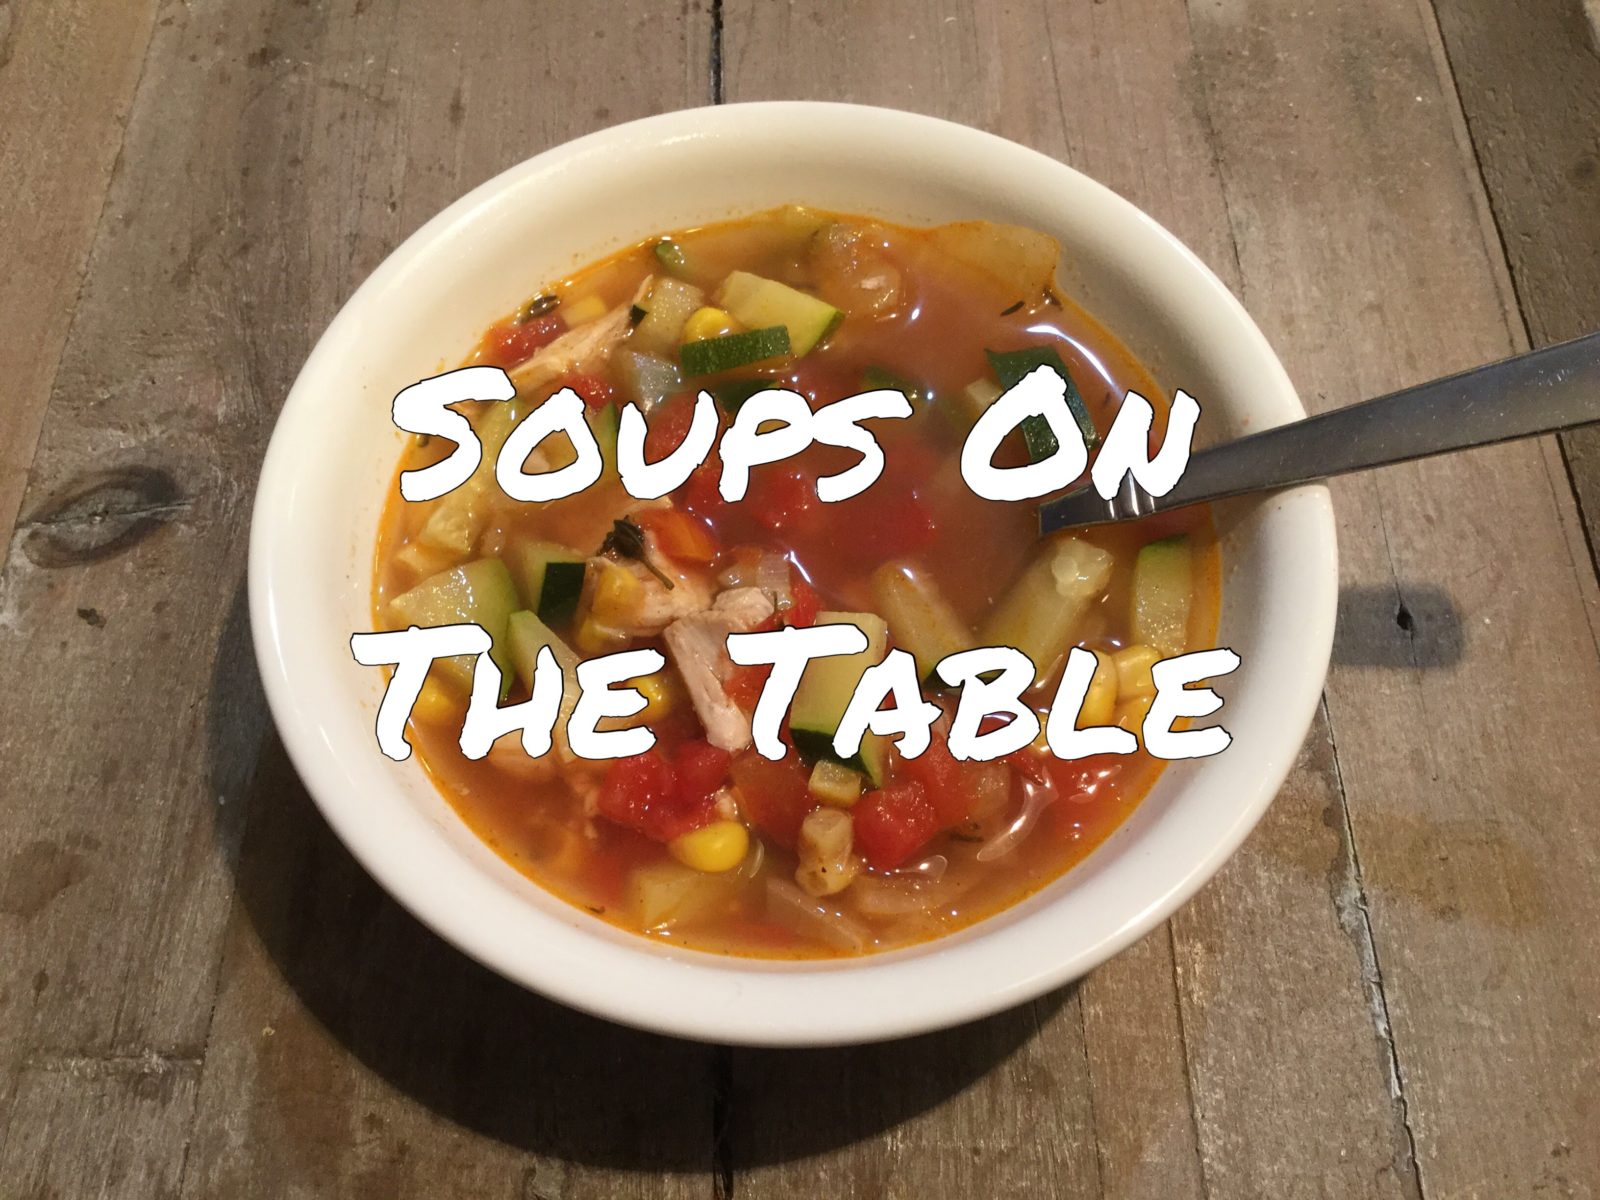 Soups On the Table